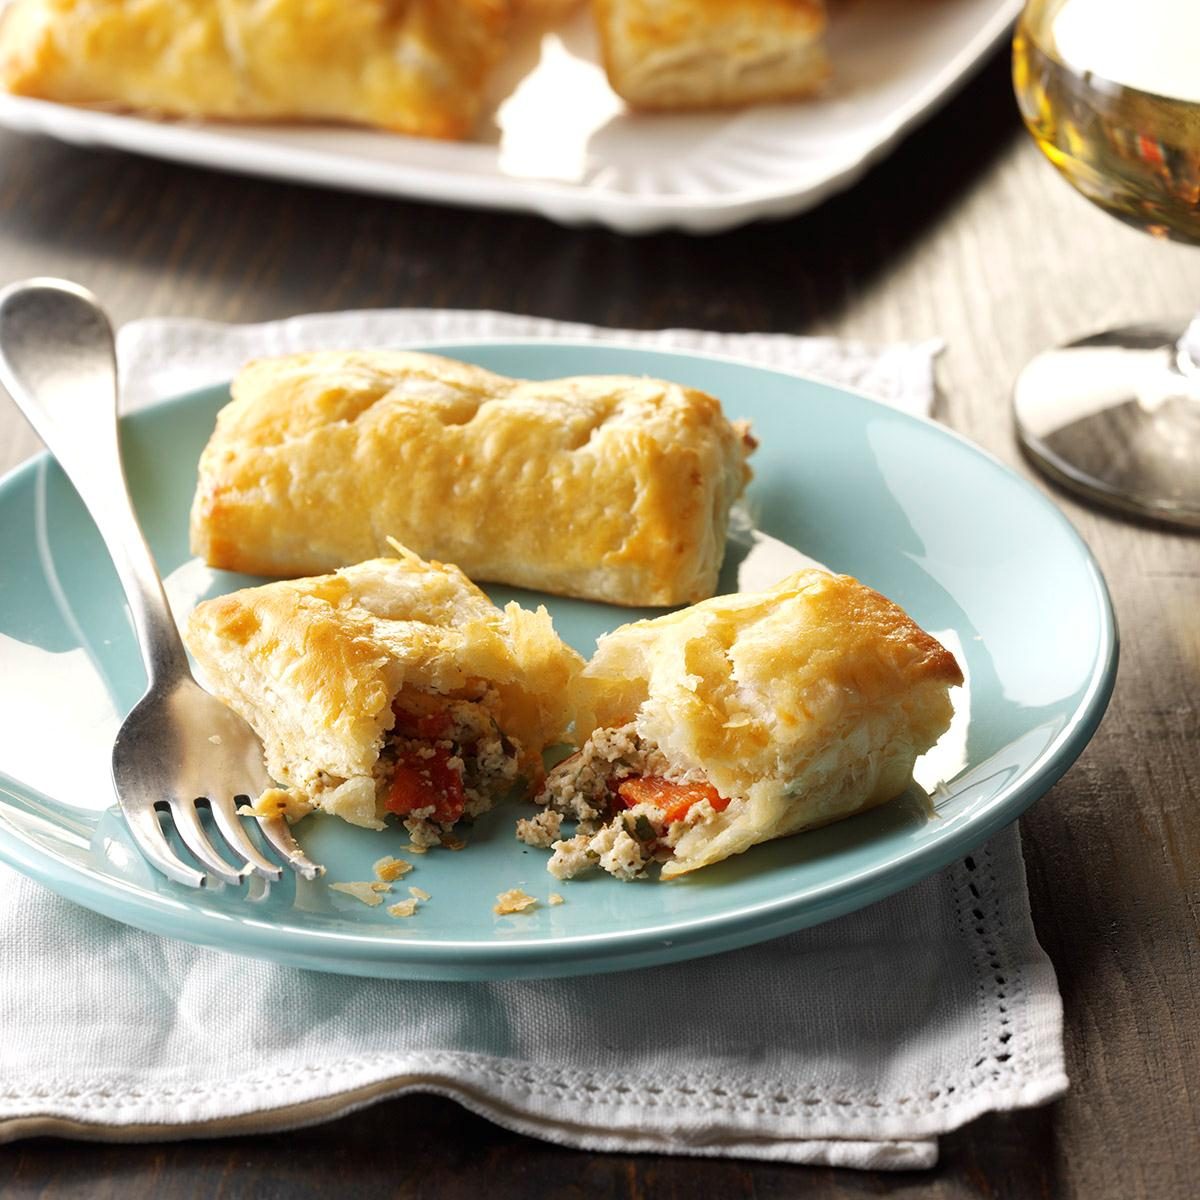 <p>Roasted red peppers and ricotta cheese give these pastry puffs delicious flavor, while parsley and oregano add a little spark. —Maria Regakis, Somerville, Massachusetts</p> <div class="listicle-page__buttons"> <div class="listicle-page__cta-button"><a href='https://www.tasteofhome.com/recipes/ricotta-puffs/'>Go to Recipe</a></div> </div>